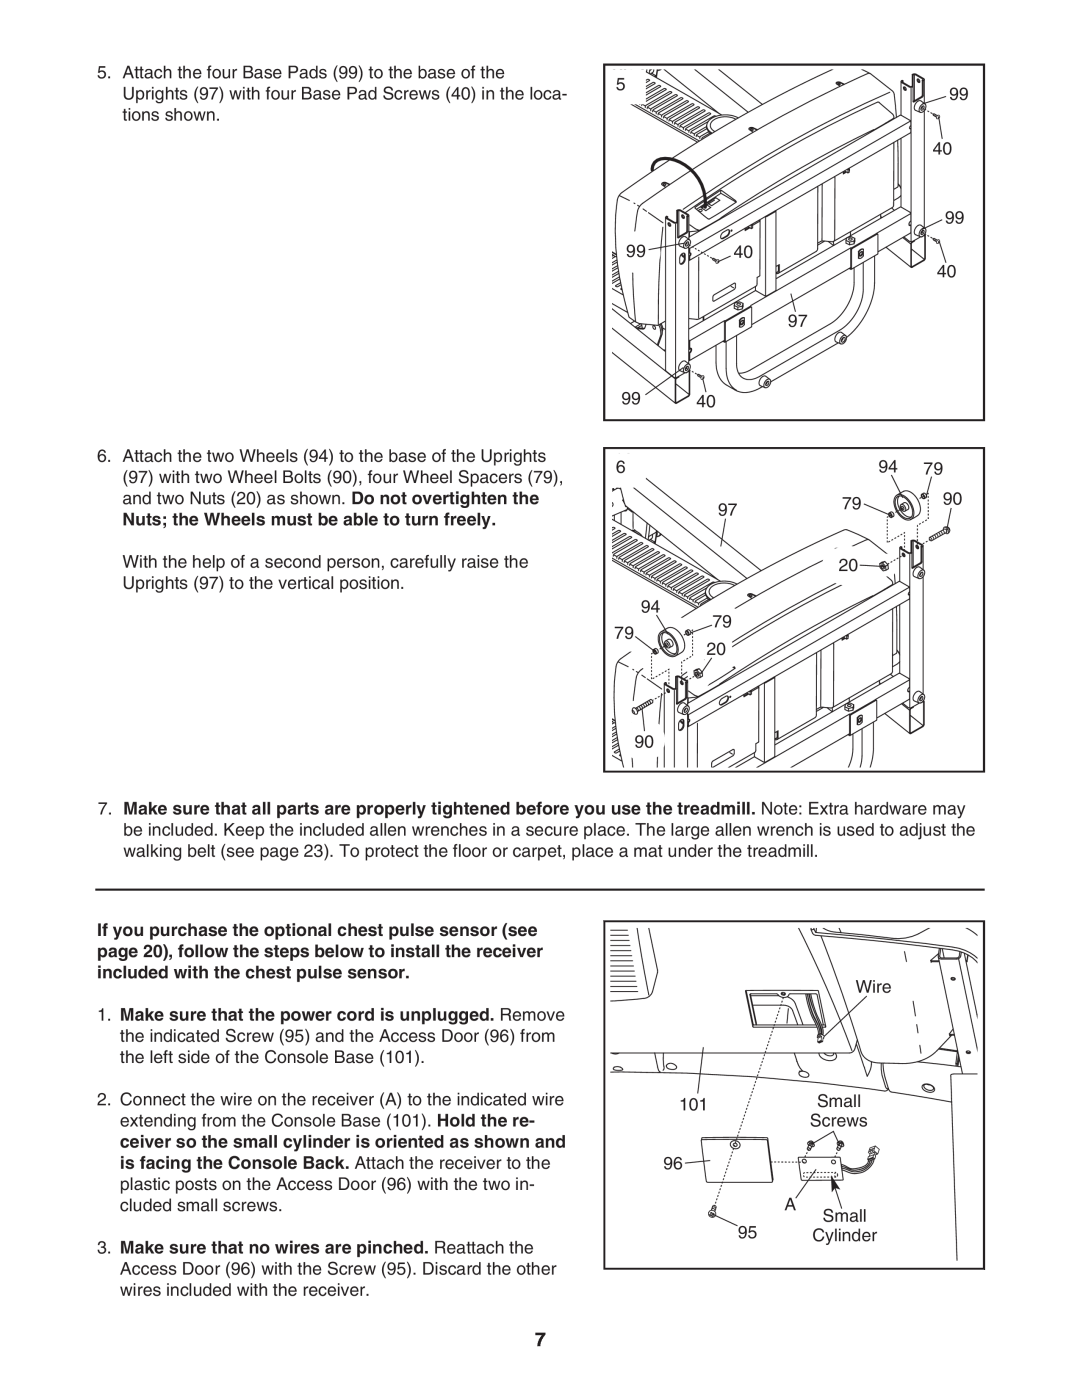 ProForm 831.29605.0 user manual Nuts the Wheels must be able to turn freely 